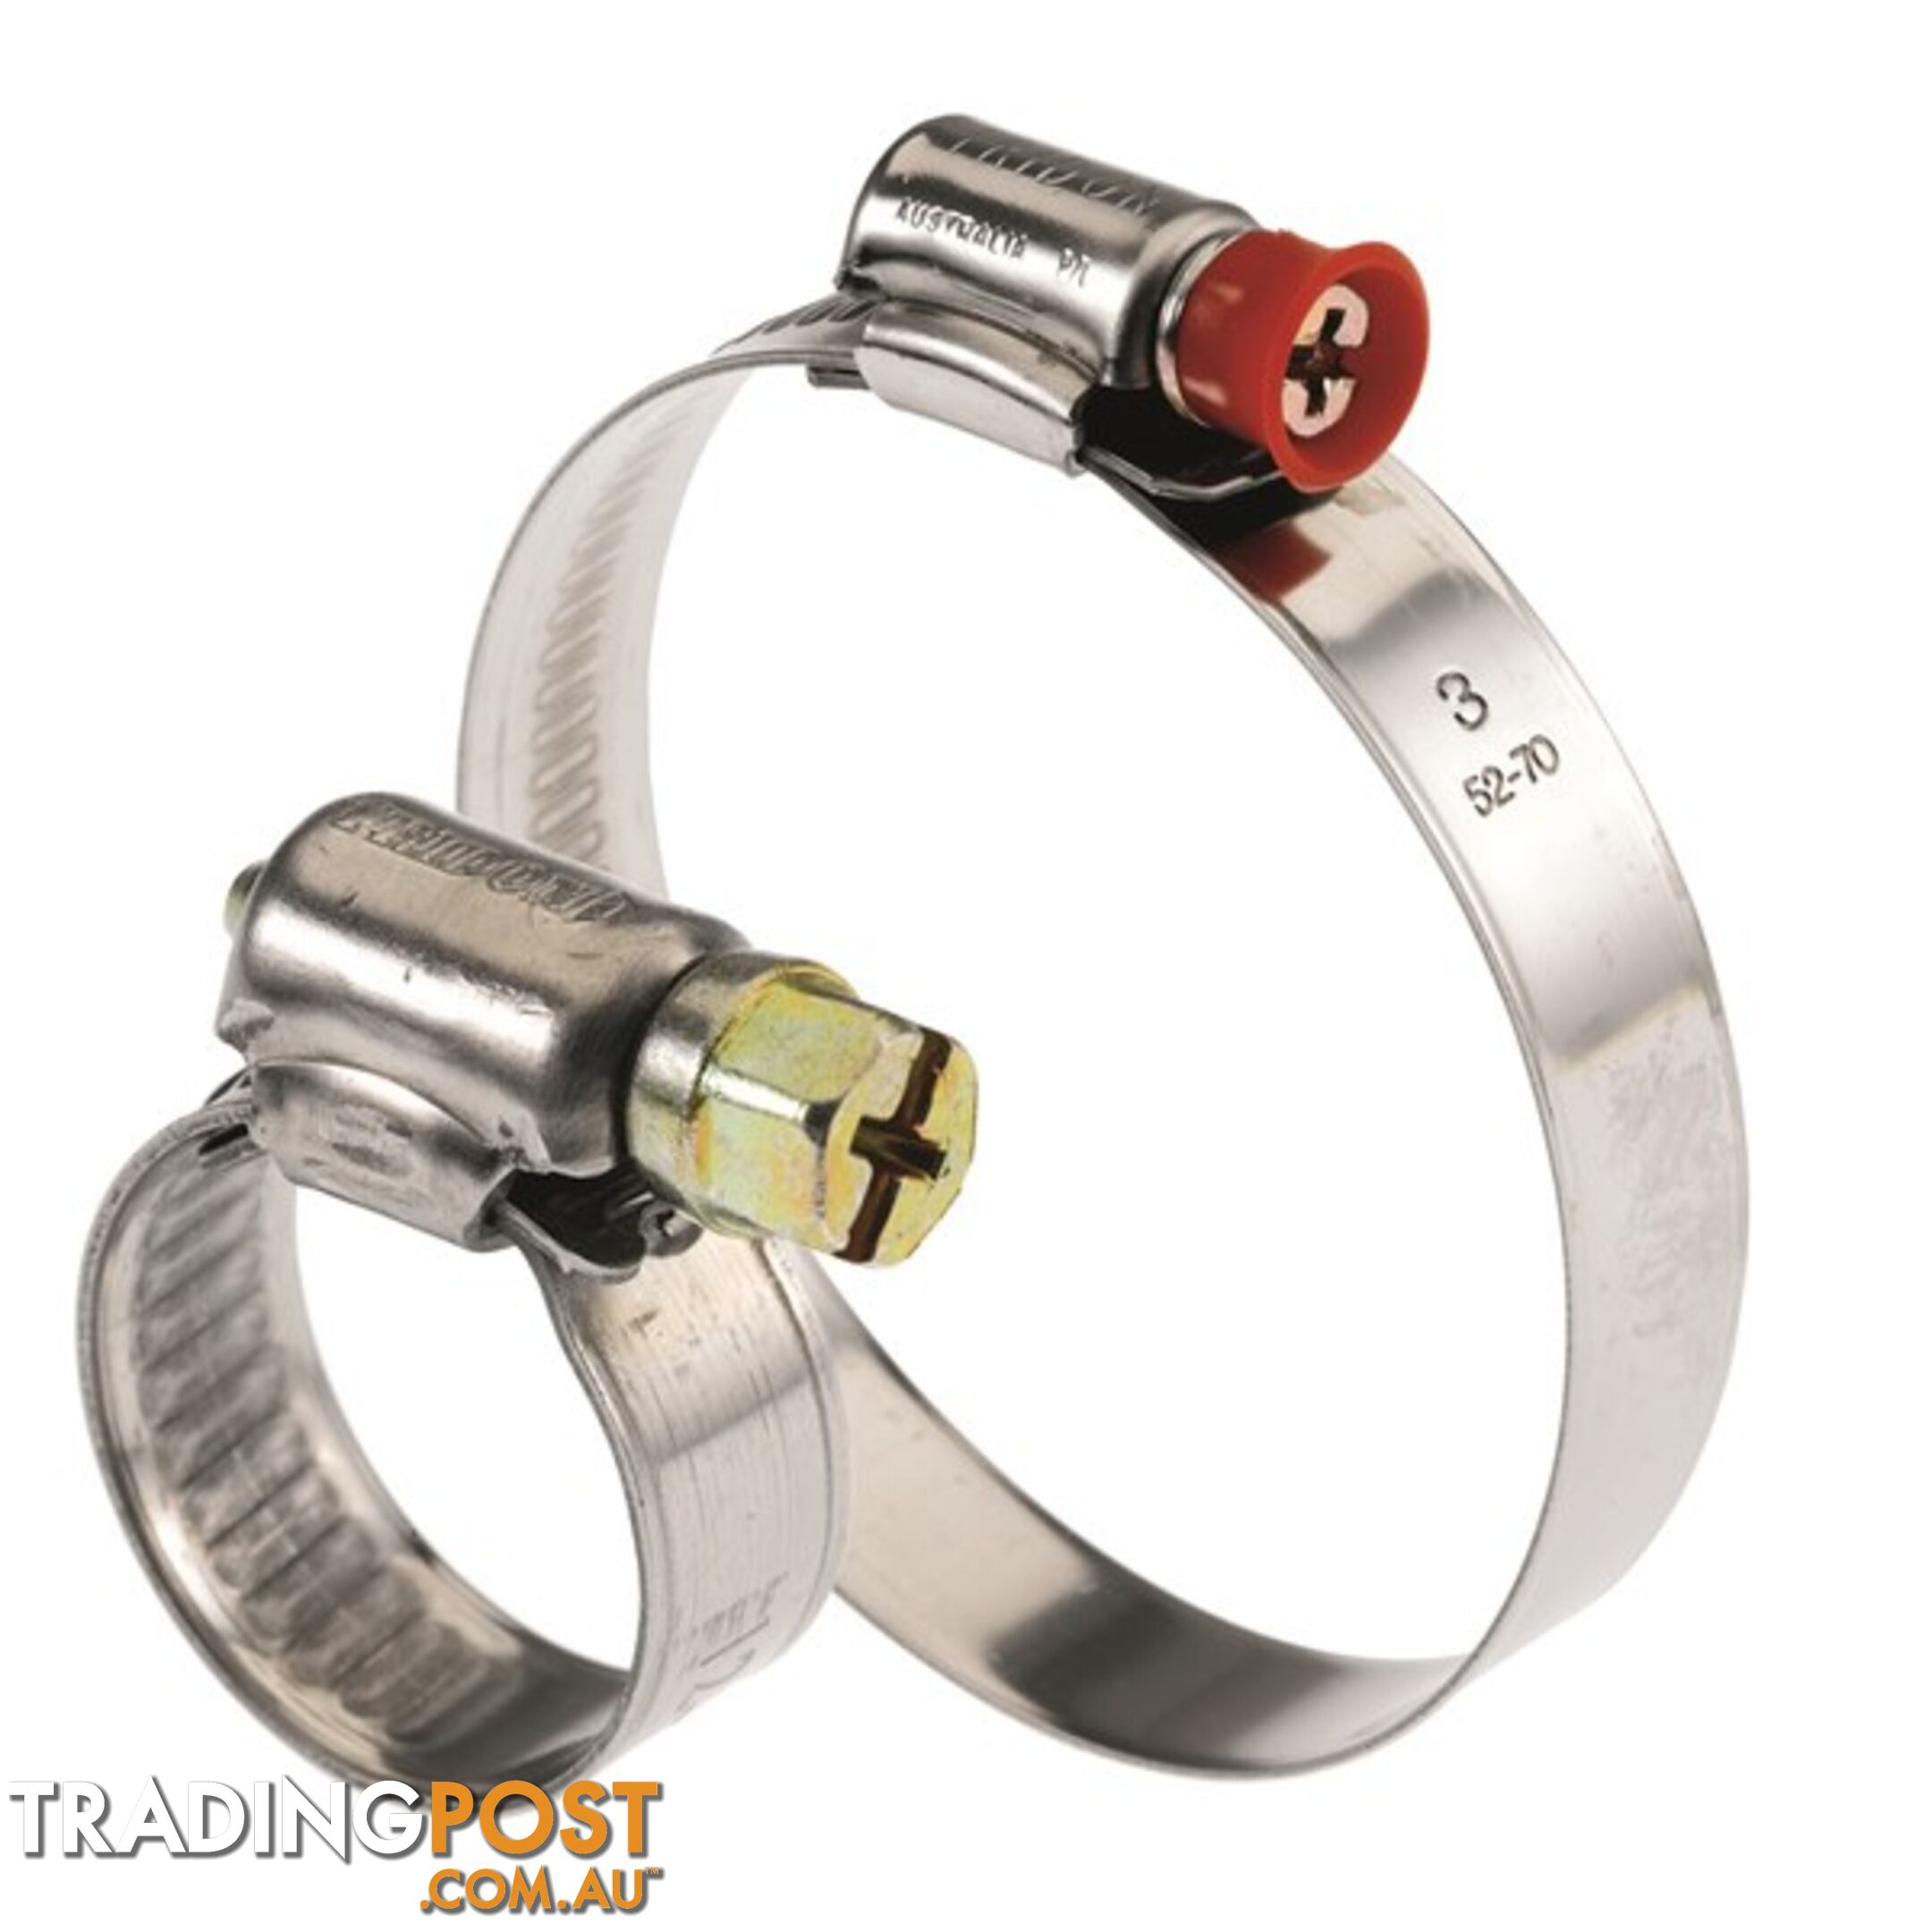 Tridon Part S.S Hose Clamp 22mm-32mm Multi Purpose Solid Band 10pk SKU - MP1AP